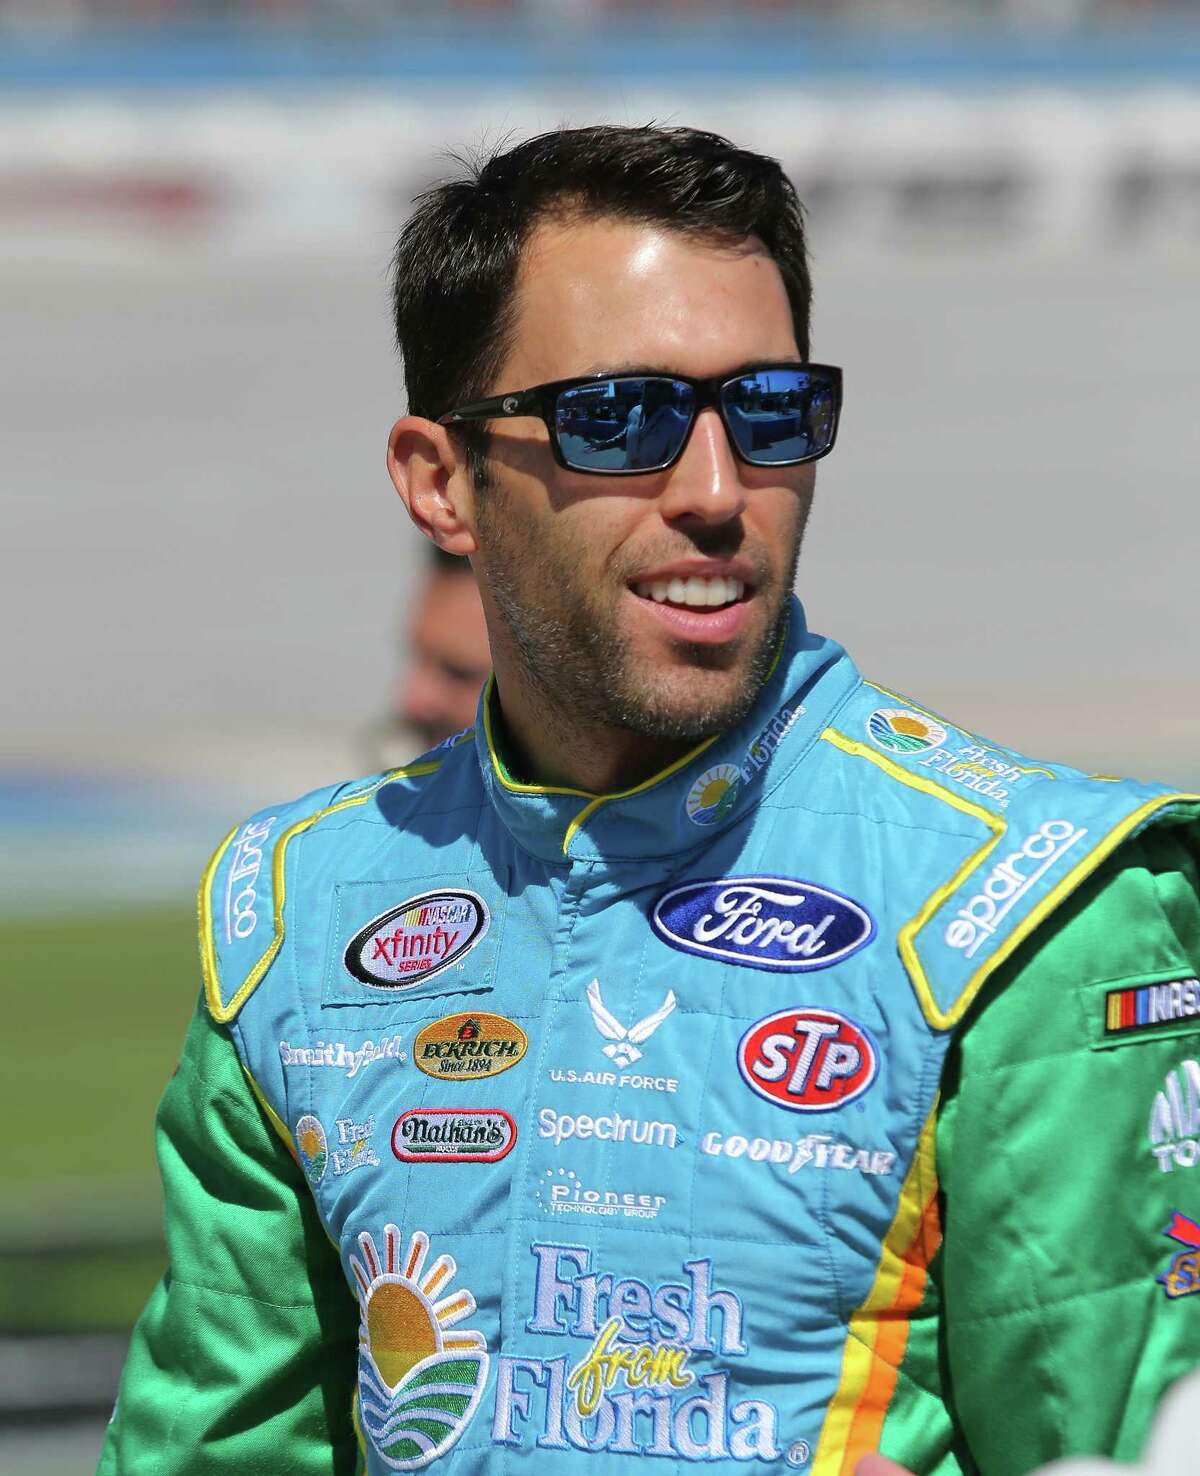 TALLADEGA, AL - MAY 06: Aric Almirola, driver of the #98 Fresh from Florida Ford, stands on the grid during qualifying for the NASCAR XFINITY Series Sparks Energy 300 at Talladega Superspeedway on May 6, 2017 in Talladega, Alabama. (Photo by Jerry Markland/Getty Images)